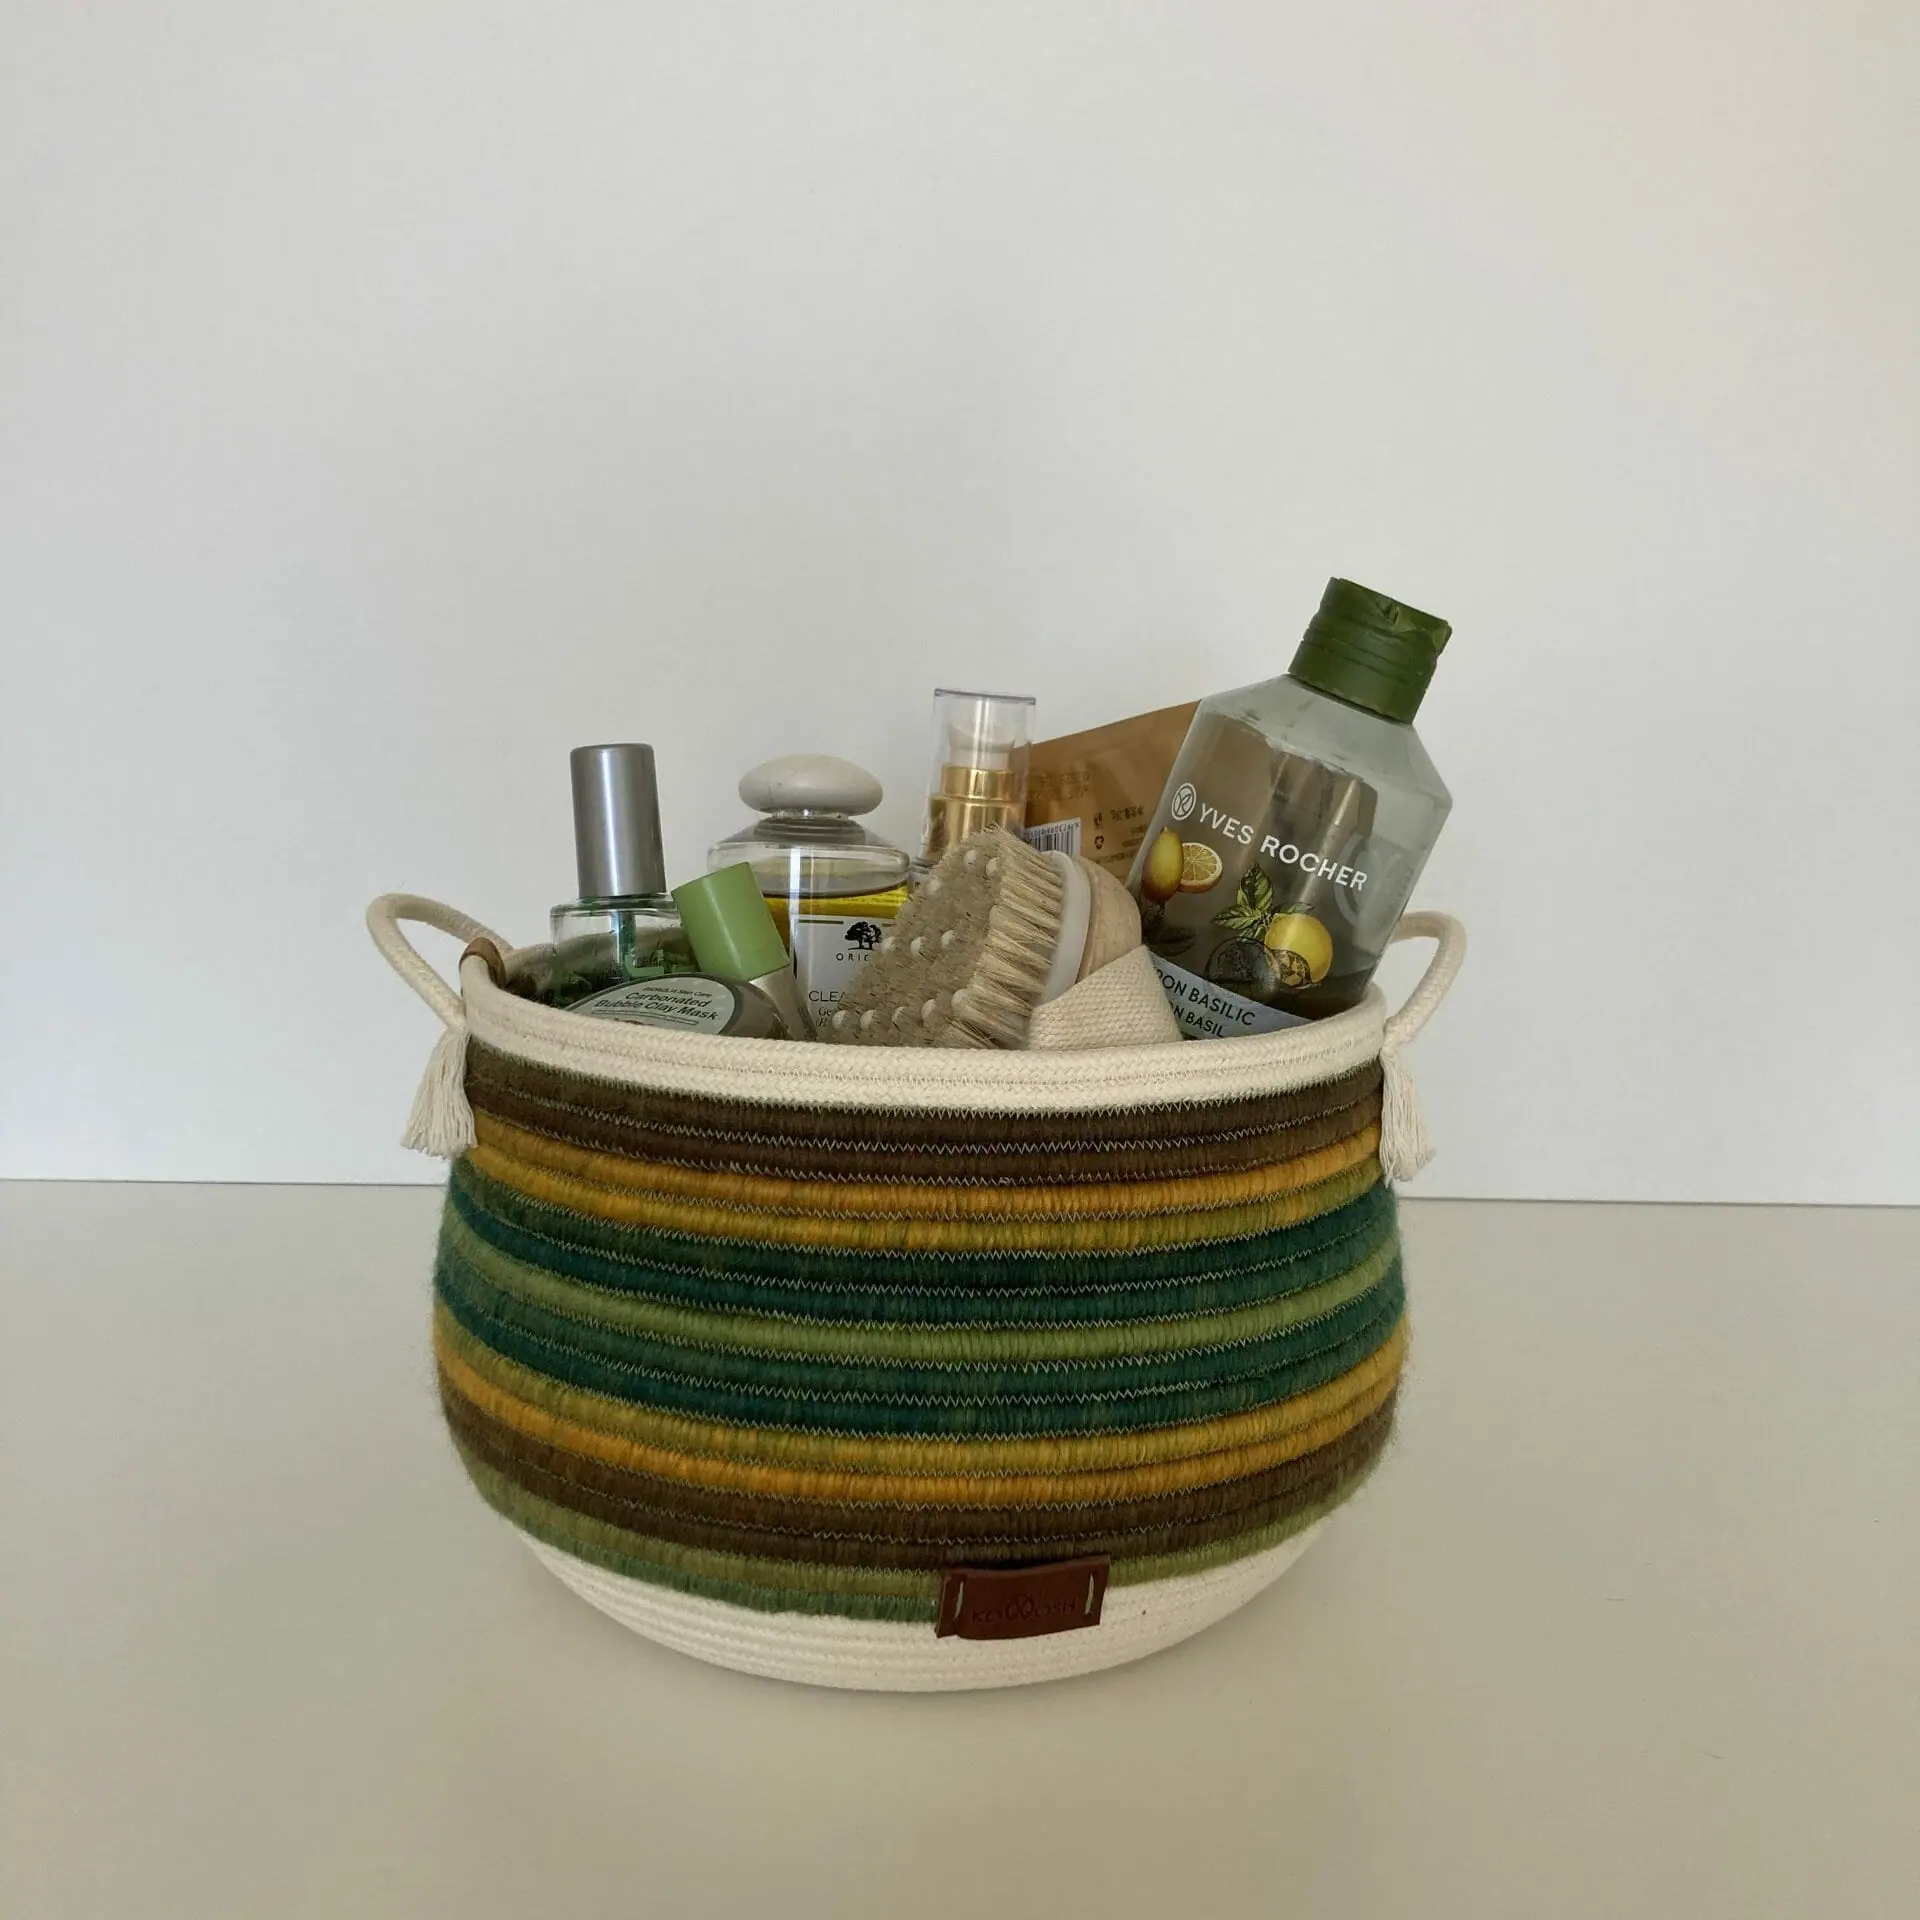 Green basket with handles 16 cm x 21.5 cm Cotton rope basket